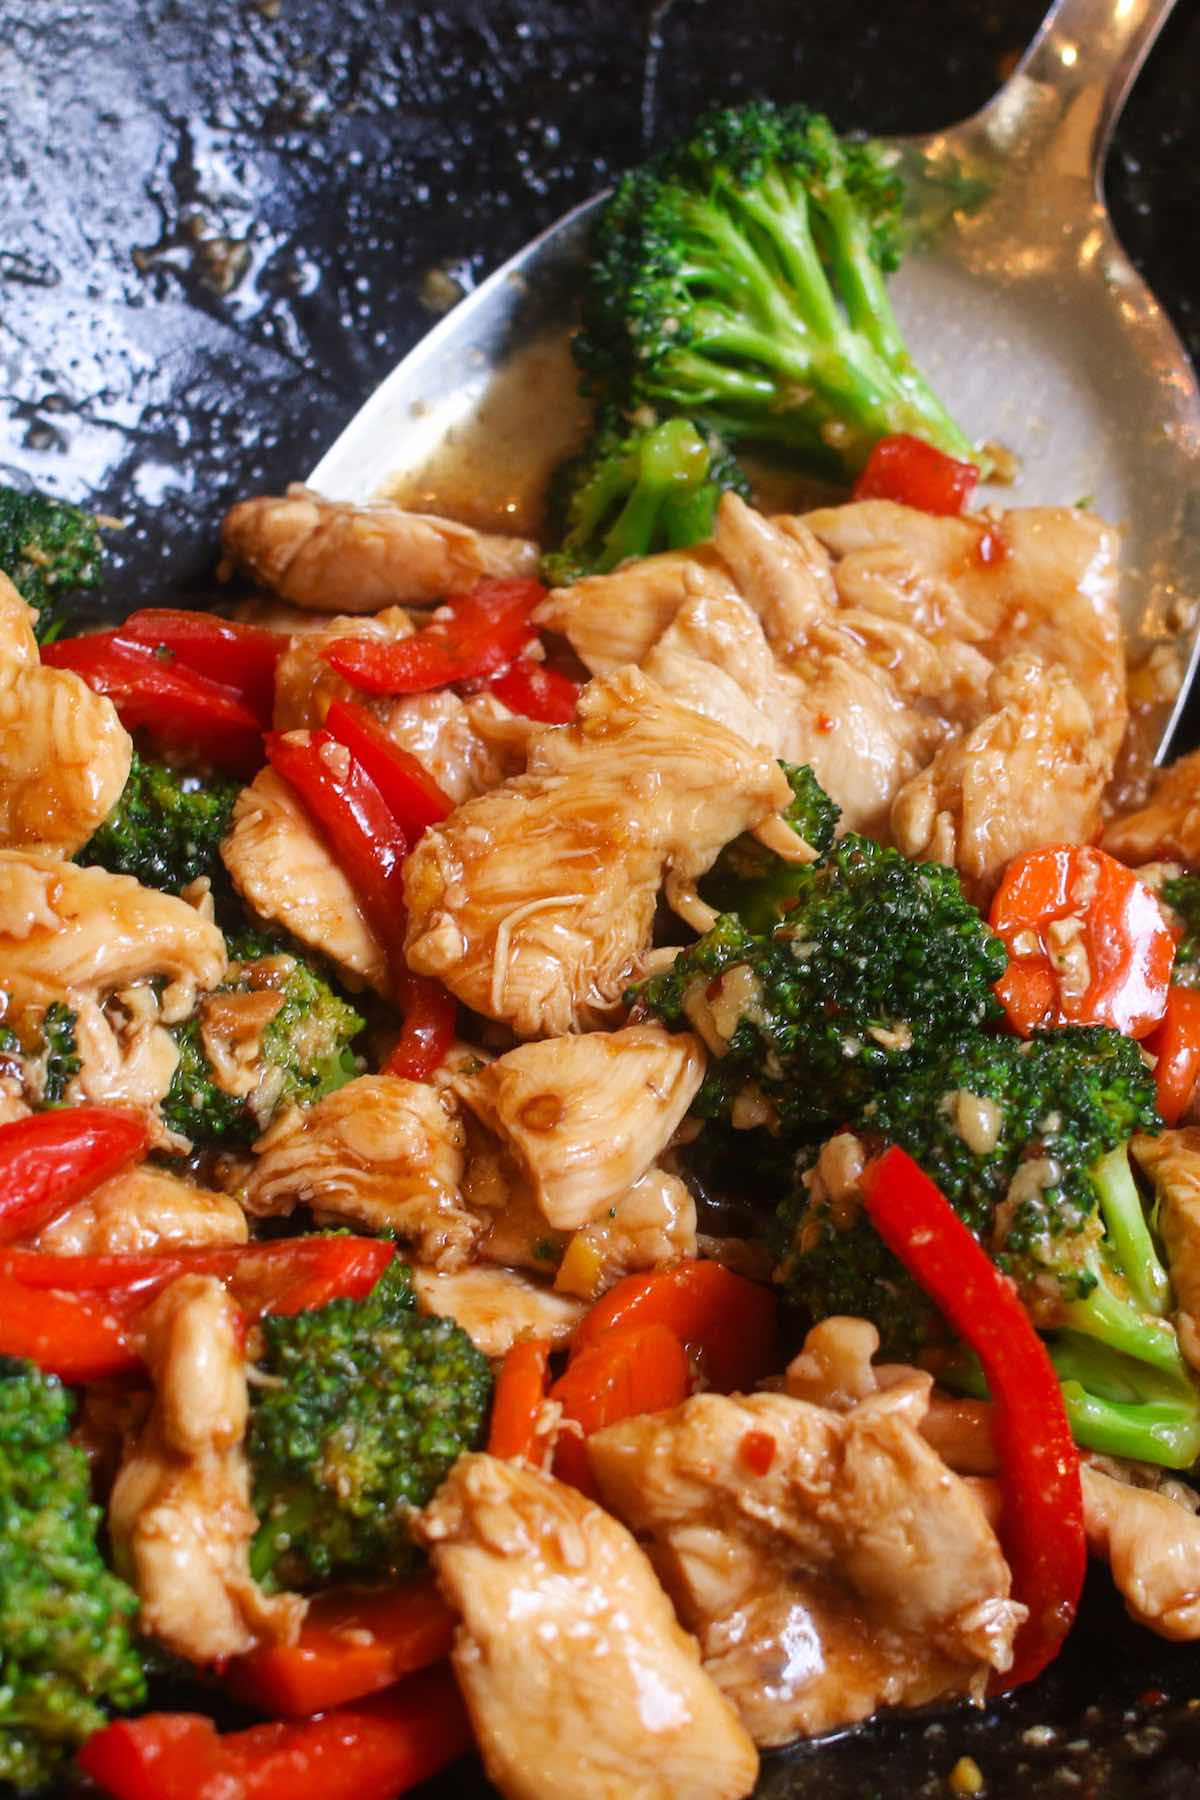 Closeup of Hunan chicken in a wok before serving showing juicy slices of chicken with broccoli, carrots and red bell pepper in a spicy hunan sauce